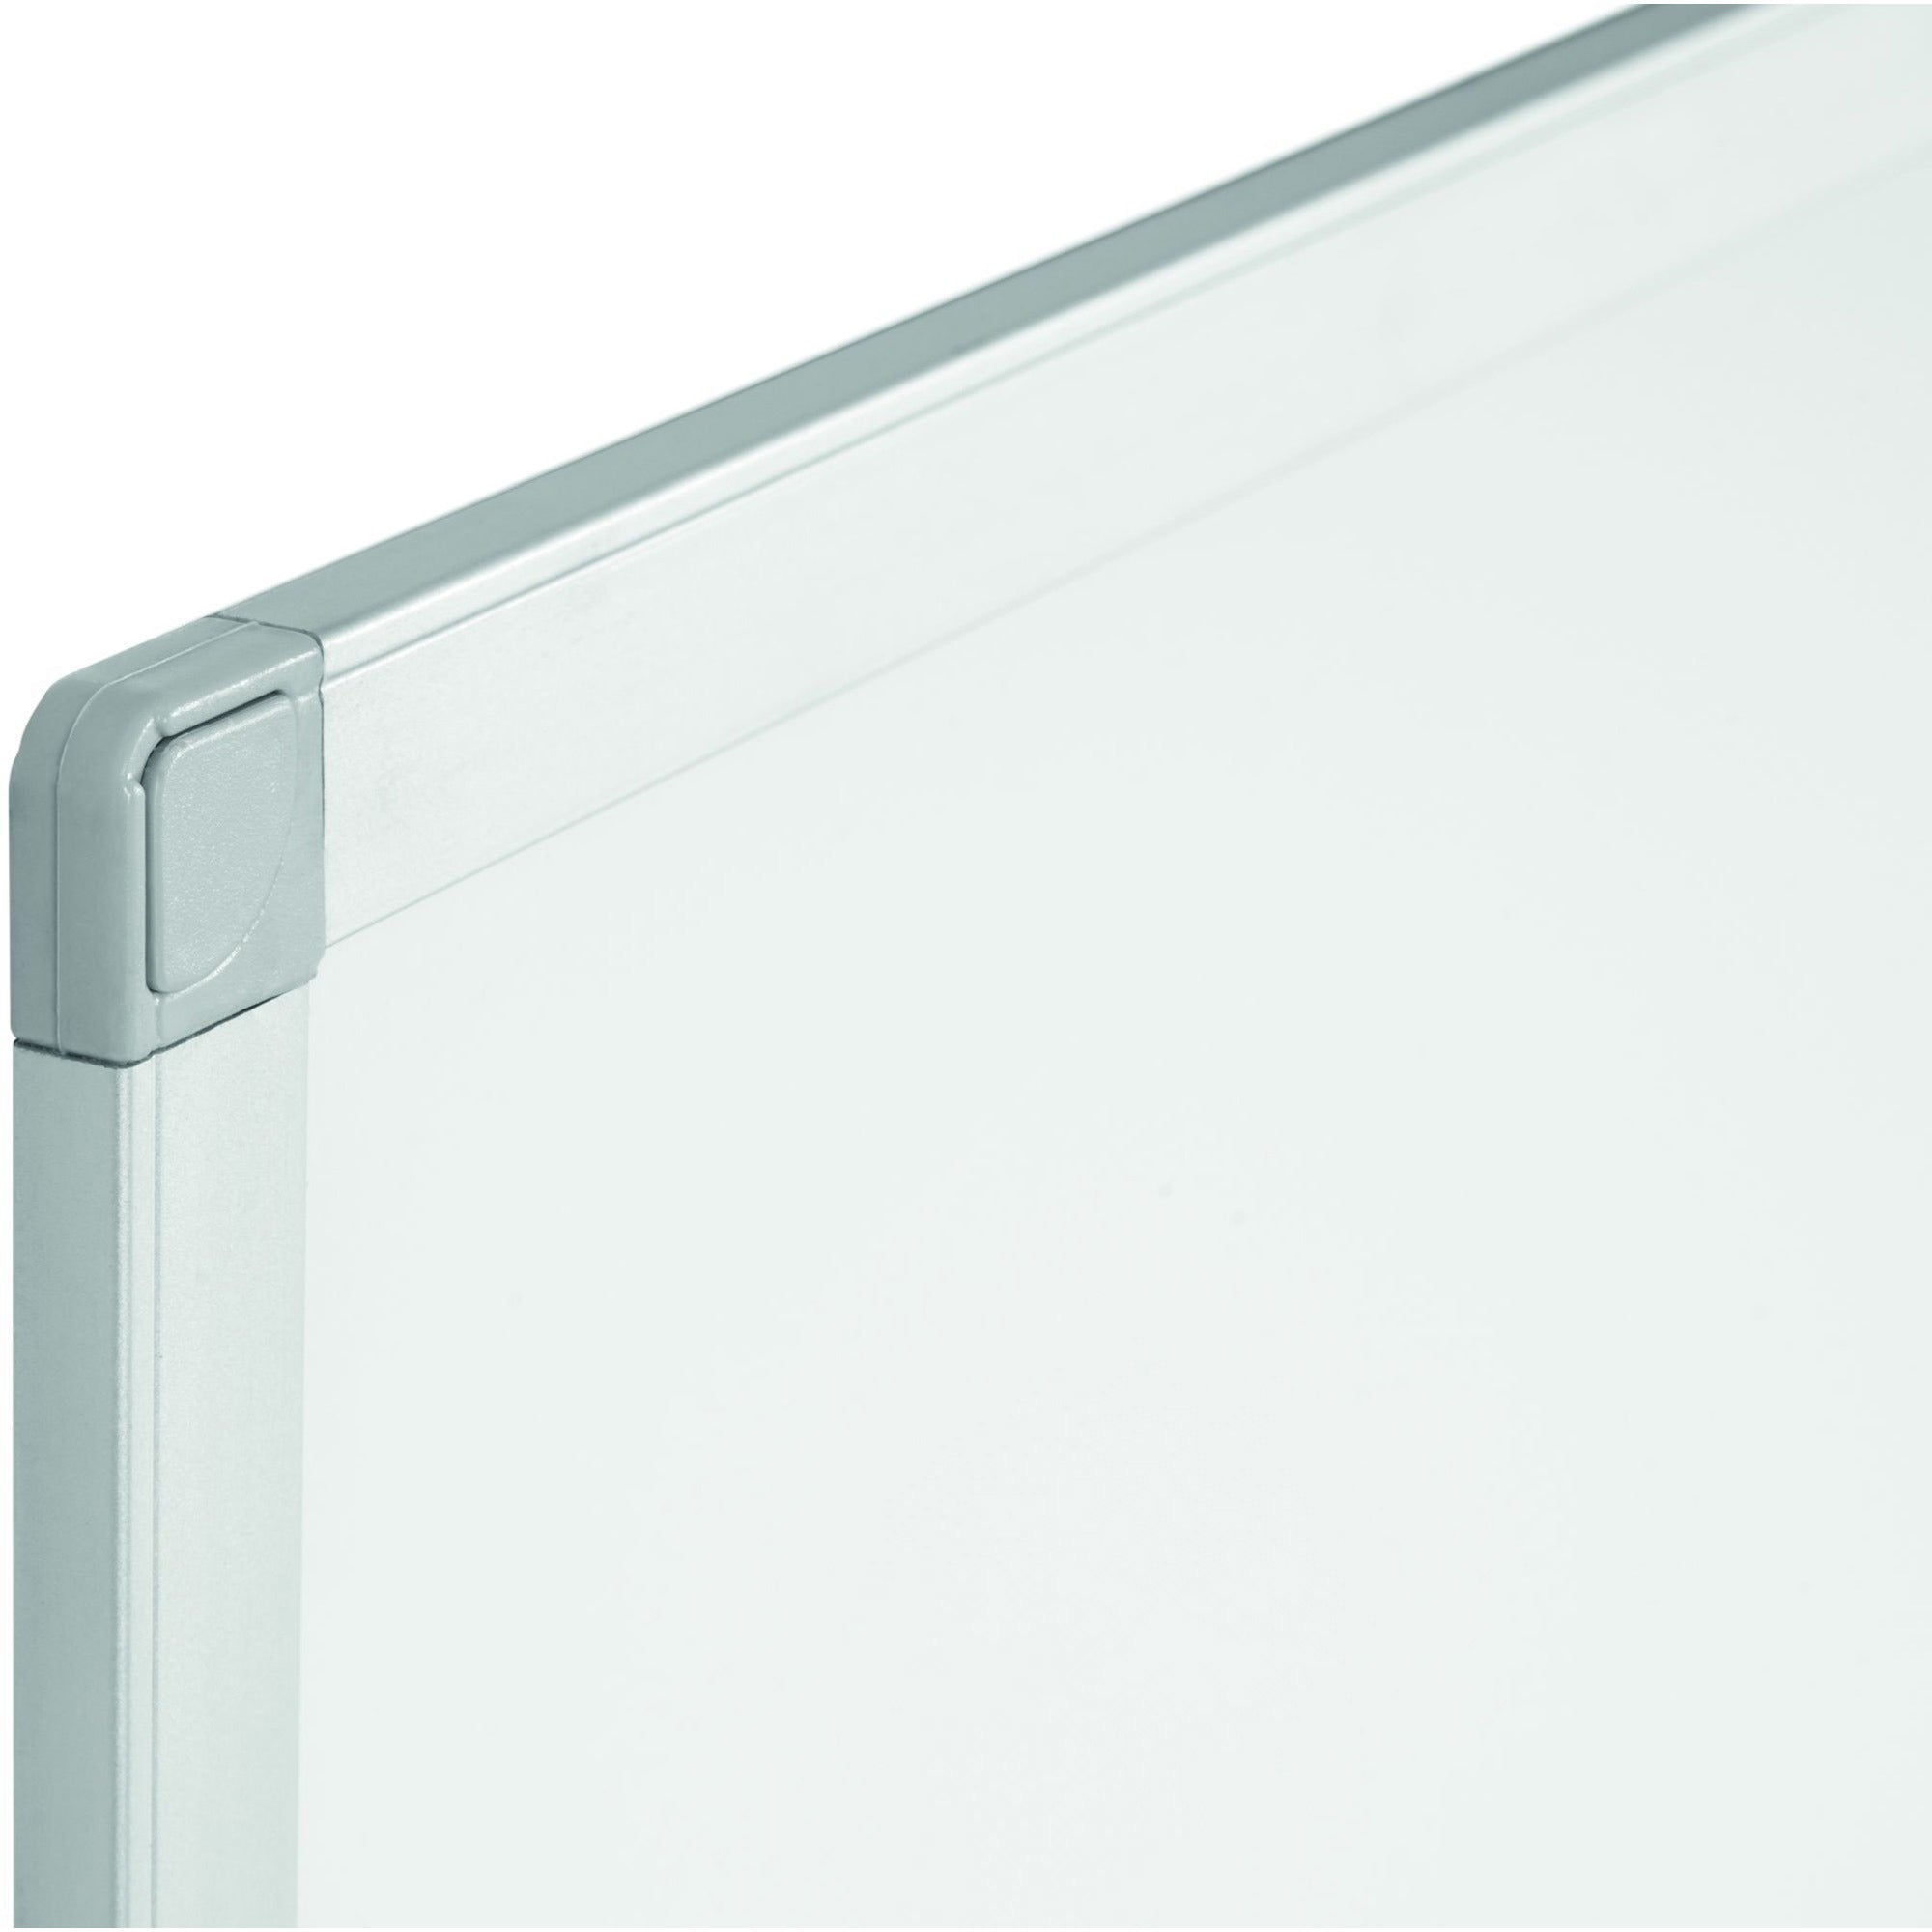 bi-silque-ayda-steel-dry-erase-board-36-3-ft-width-x-24-2-ft-height-white-steel-surface-aluminum-frame-rectangle-horizontal-vertical-magnetic-1-each_bvcma03759214 - 3